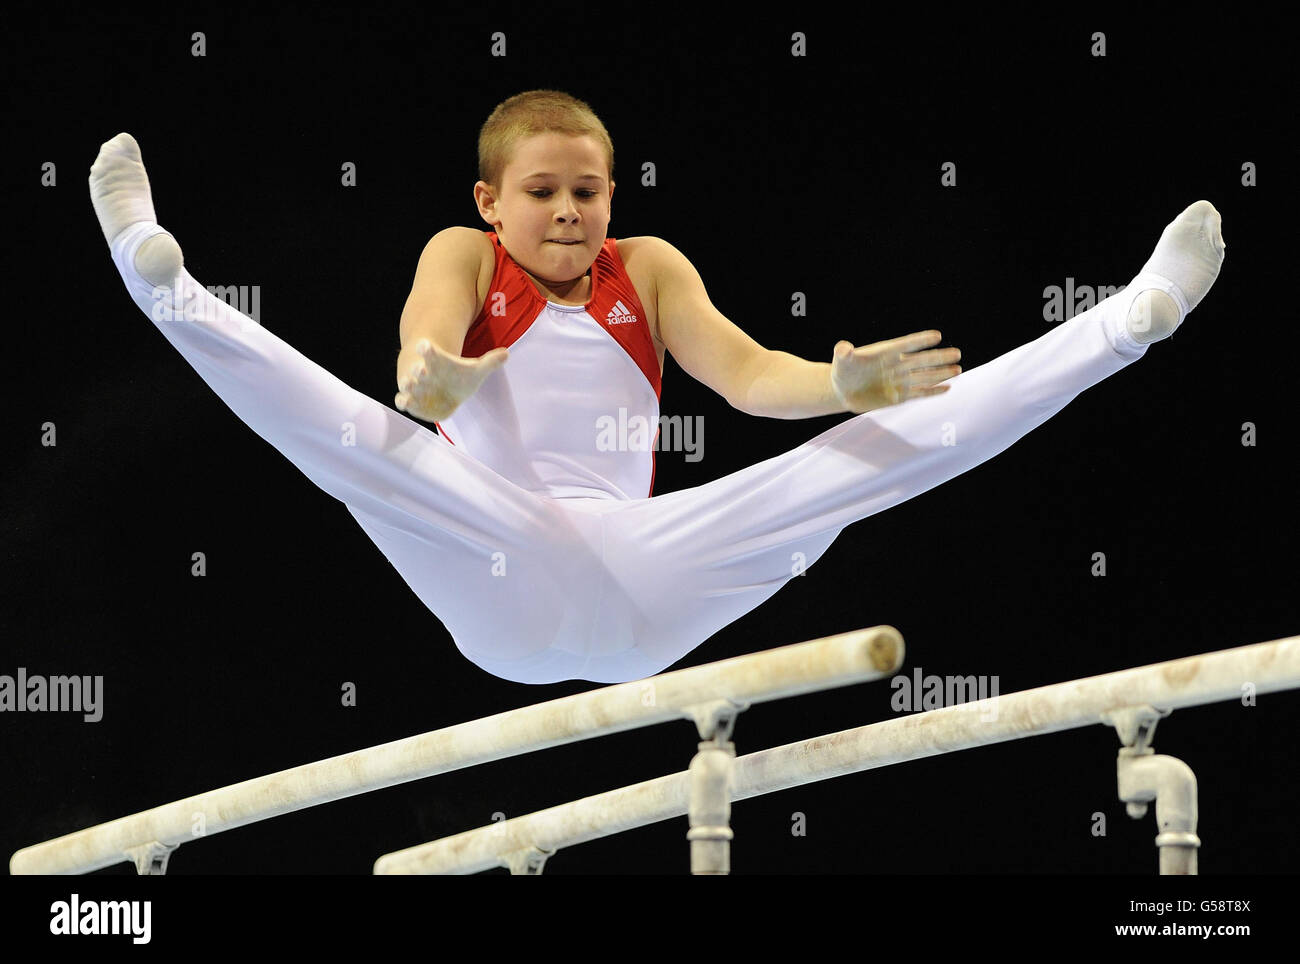 South Essex Gymnastics club's Brinn Bevan performing on parallel bars during the individual apparatus finals during day five of the British Jumping Derby Meeting at the All England Jumping Course, Hickstead. Stock Photo